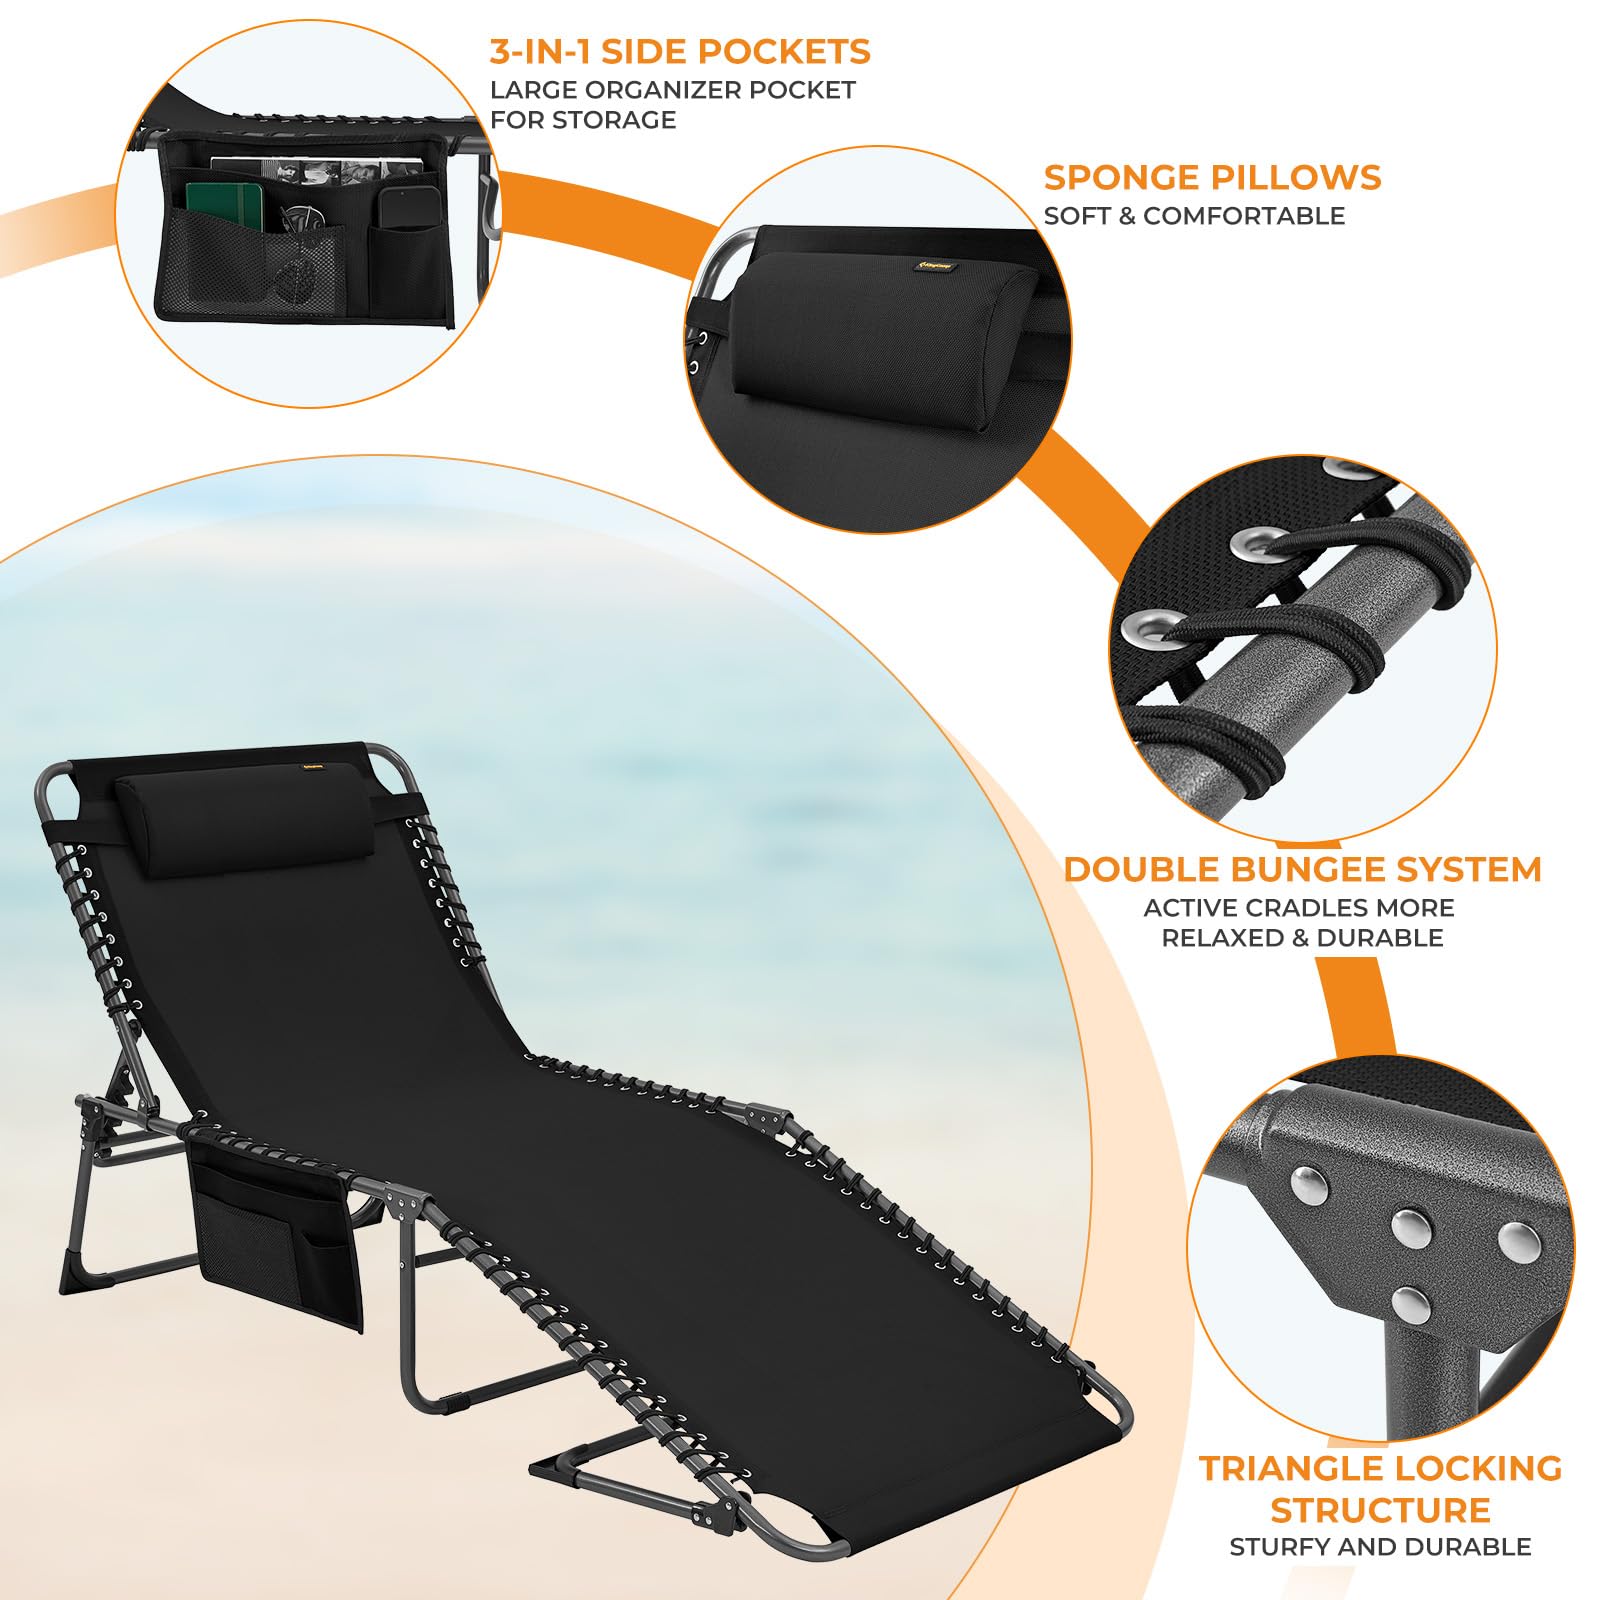 KingCamp Widen 3-folding Lounge Chair and Cushion Set